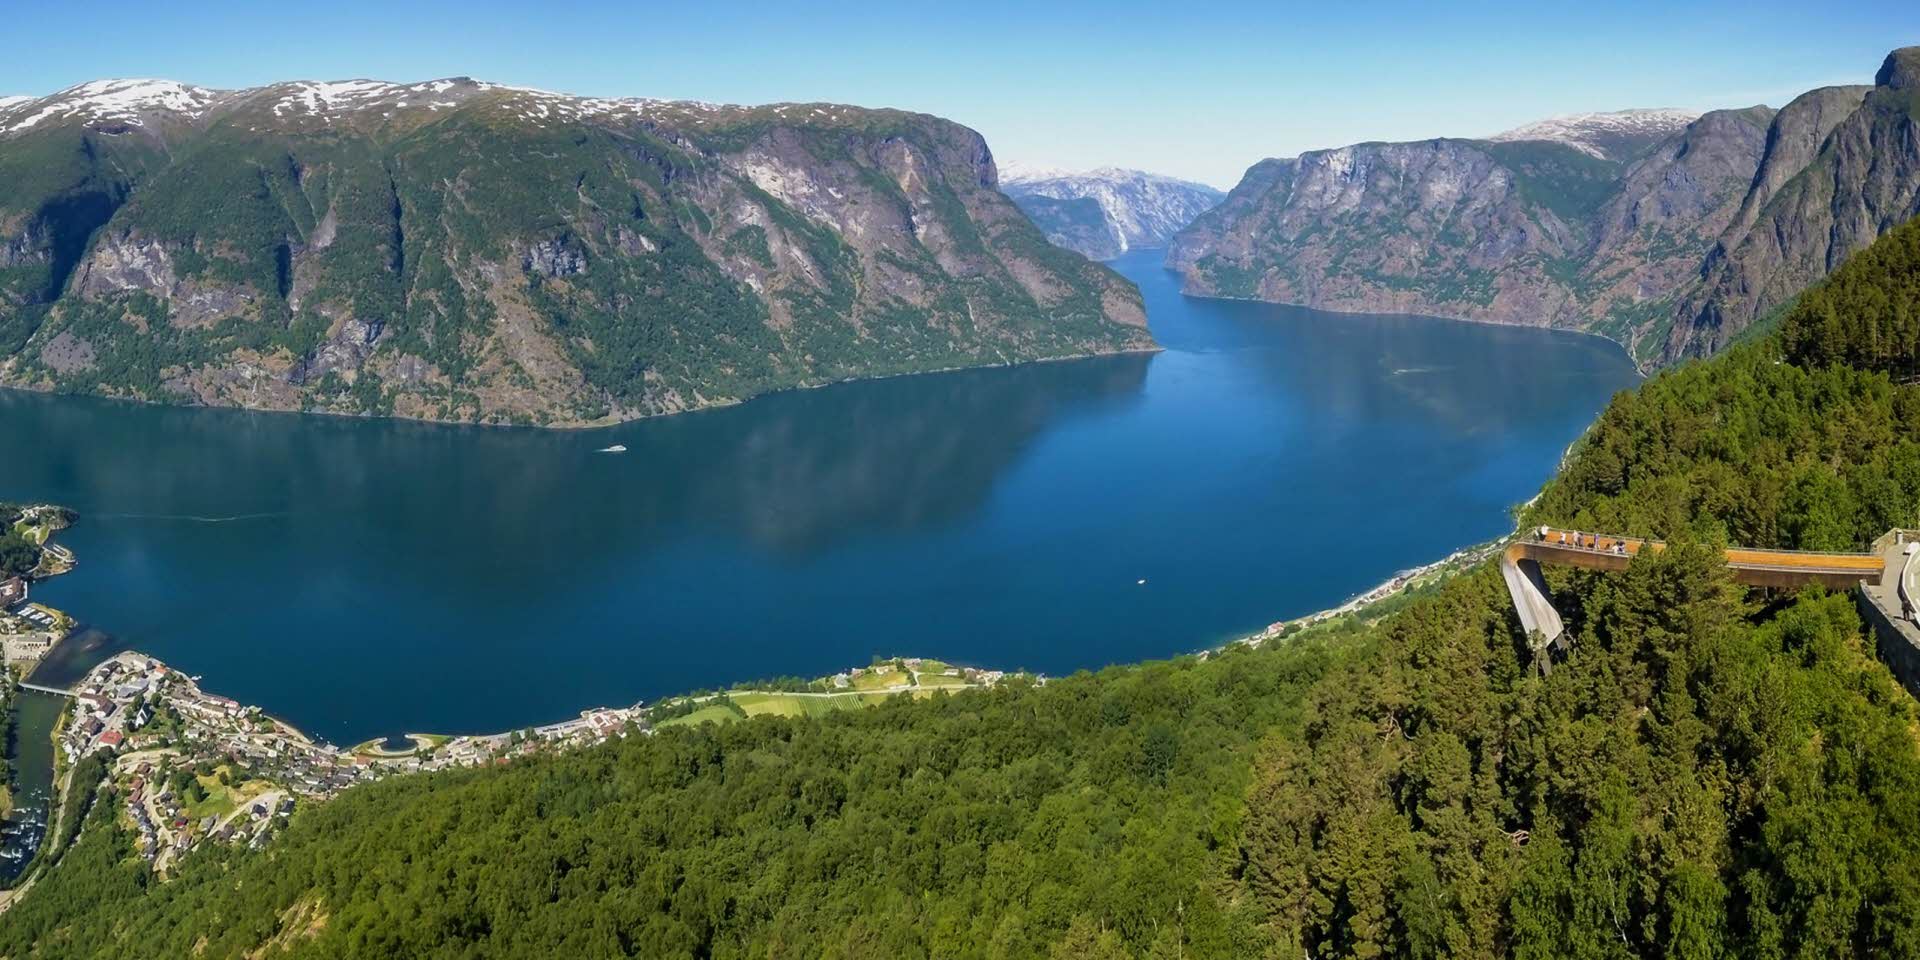 Panorama of Aurlandfjord in summer. Stegastein Viewpoint seen from above with people overlooking the unesco listed fjord